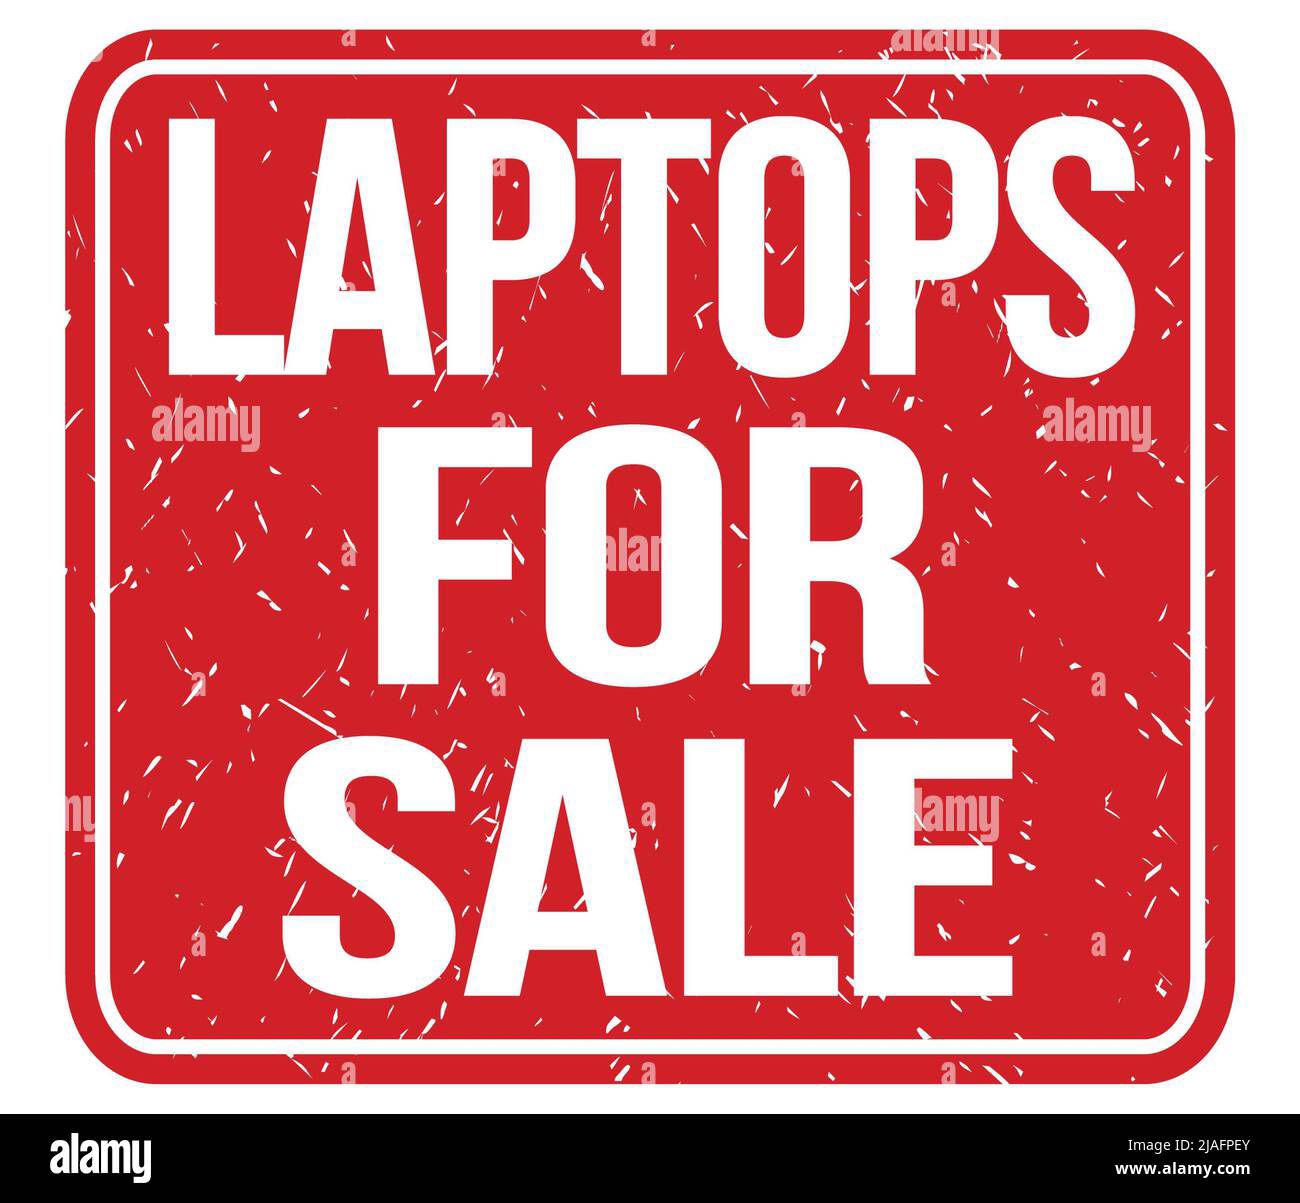 Laptop And Tablets 